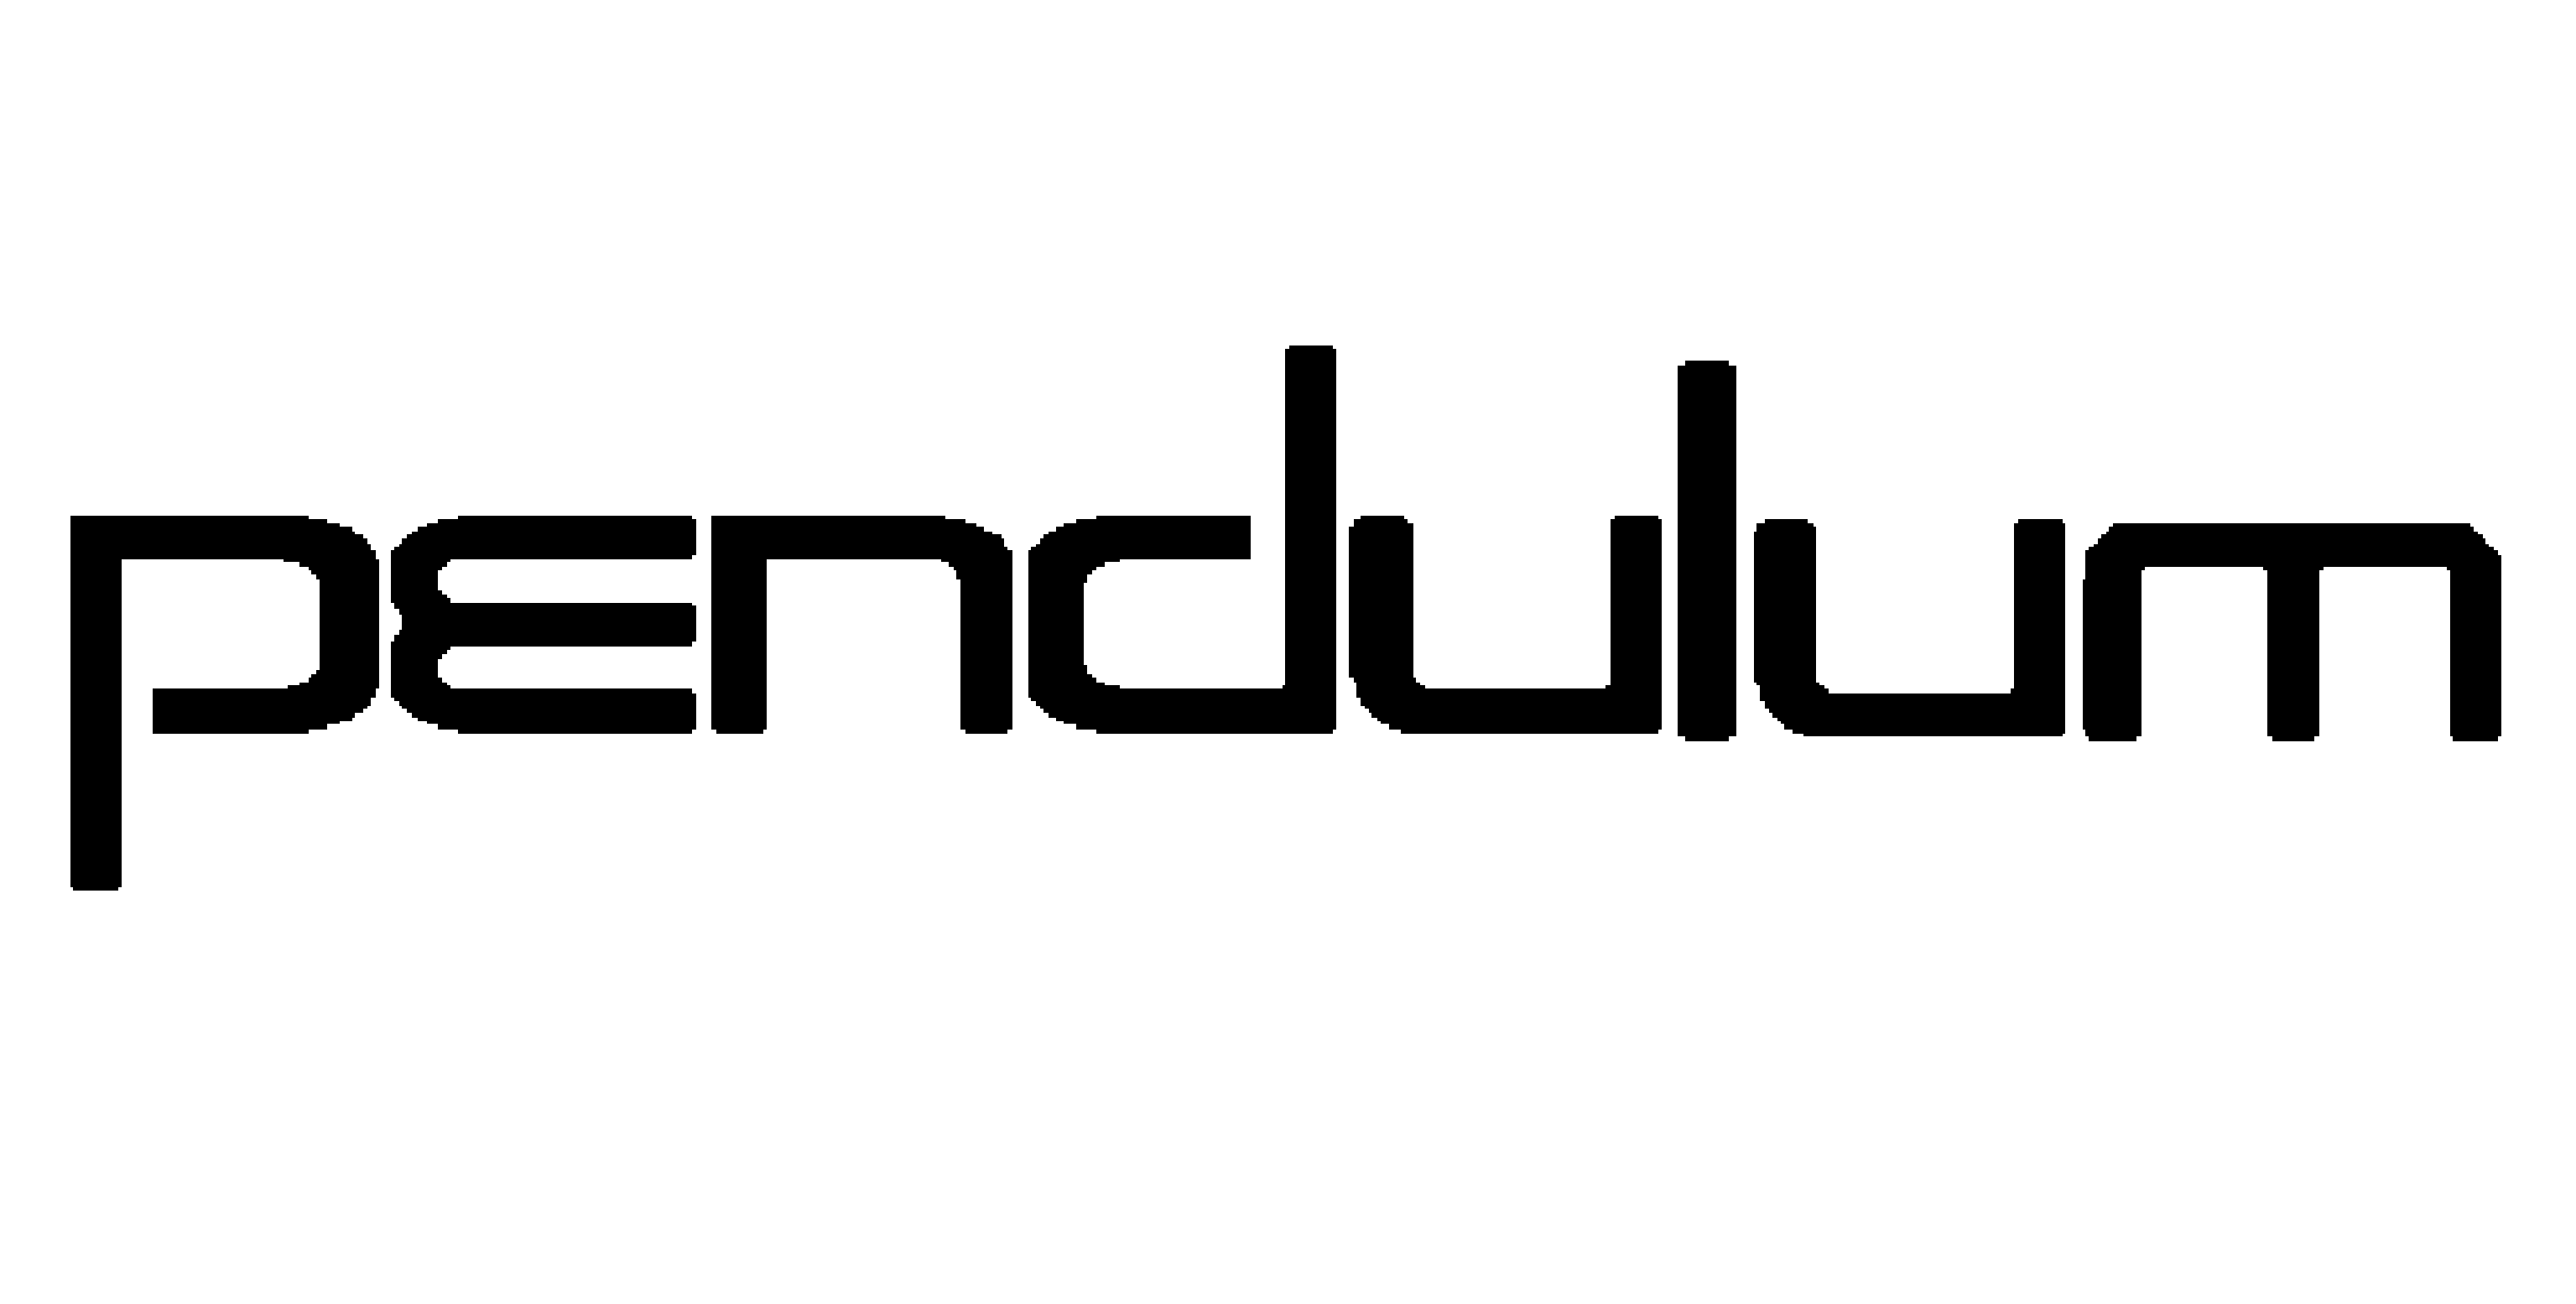 Old MS Logo - Old Pendulum logo remake in MS Paint